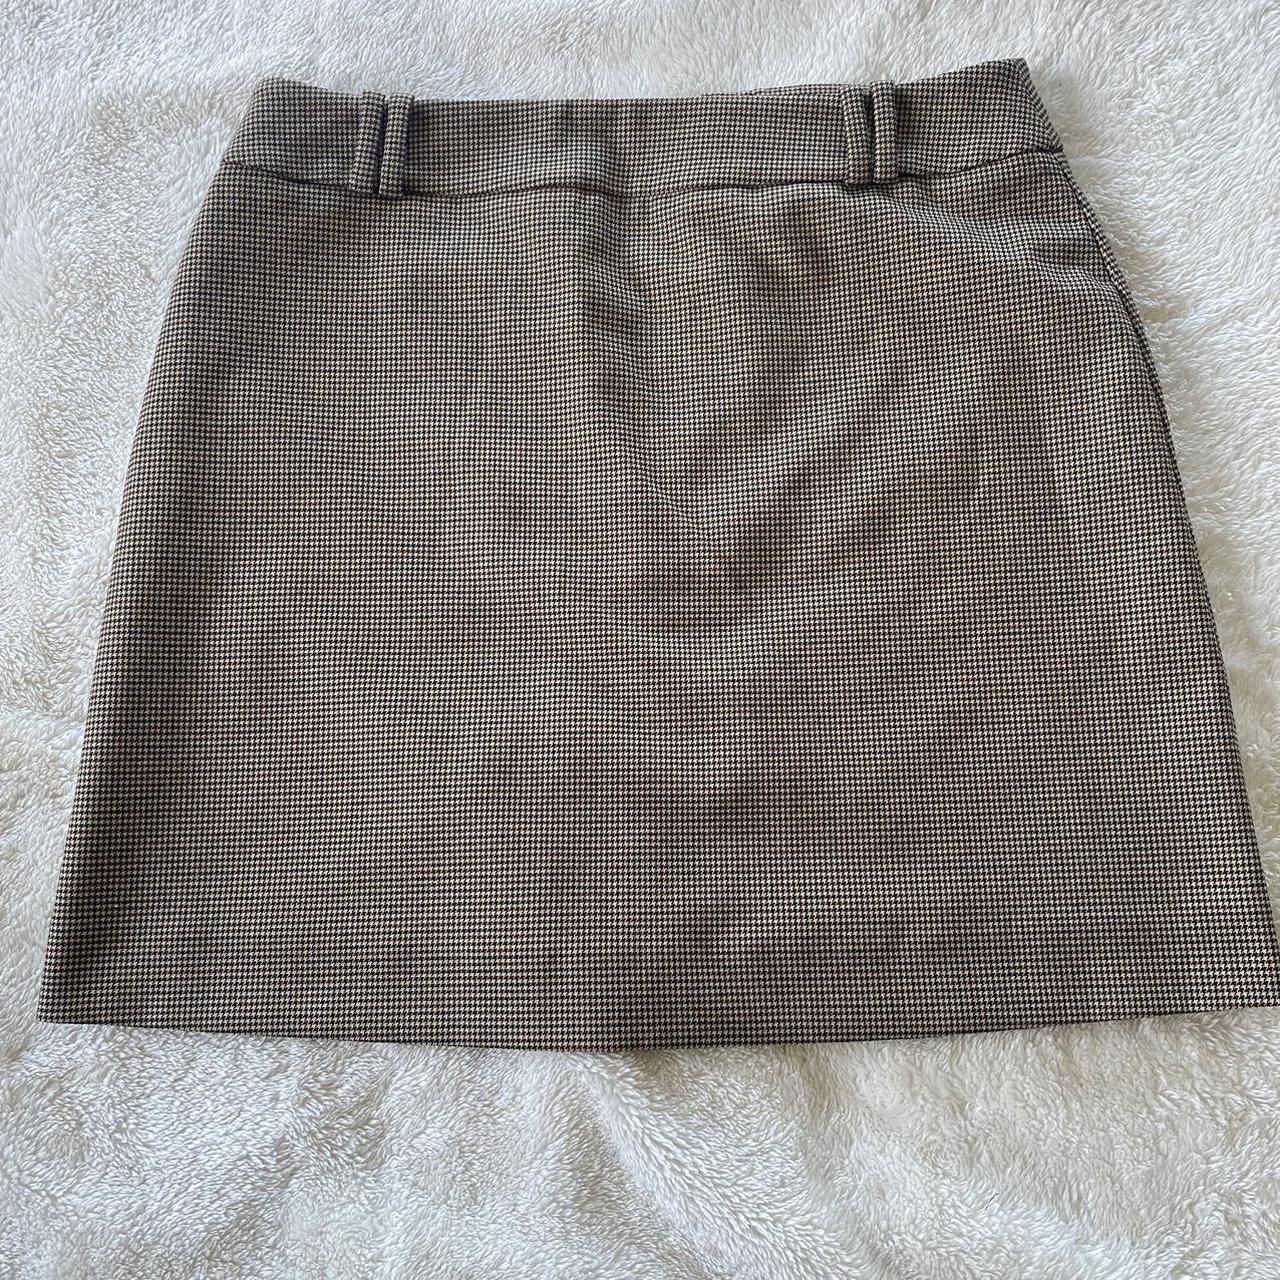 Cue A-Line 70s inspired mini skirt, selling as I... - Depop